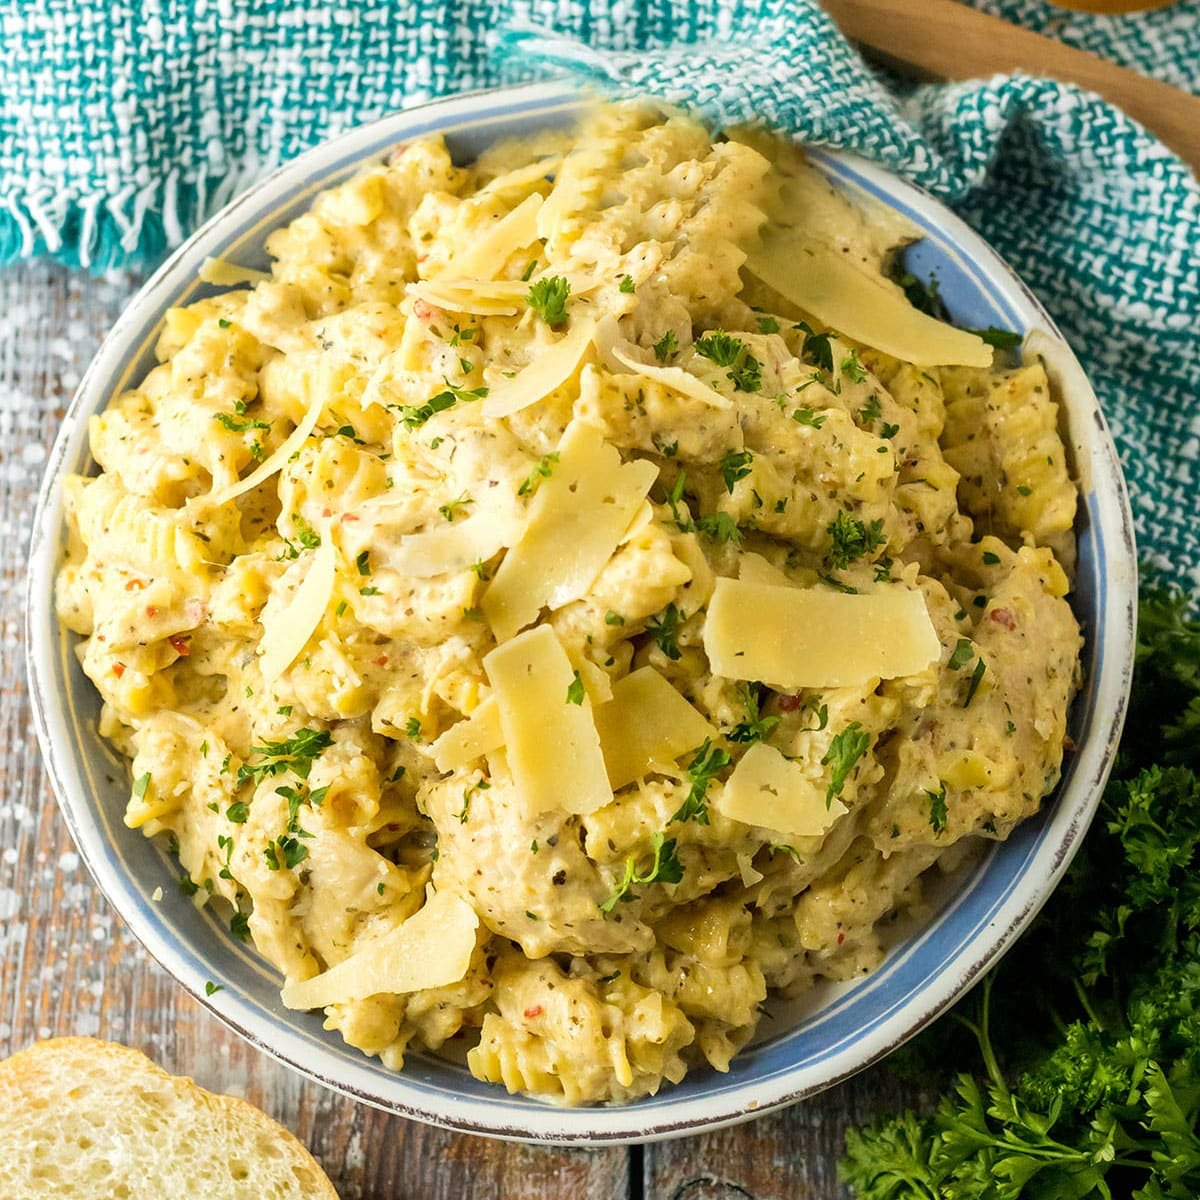 https://www.persnicketyplates.com/wp-content/uploads/2023/03/slow-cooker-garlic-parmesan-pasta28-SQUARE.jpg